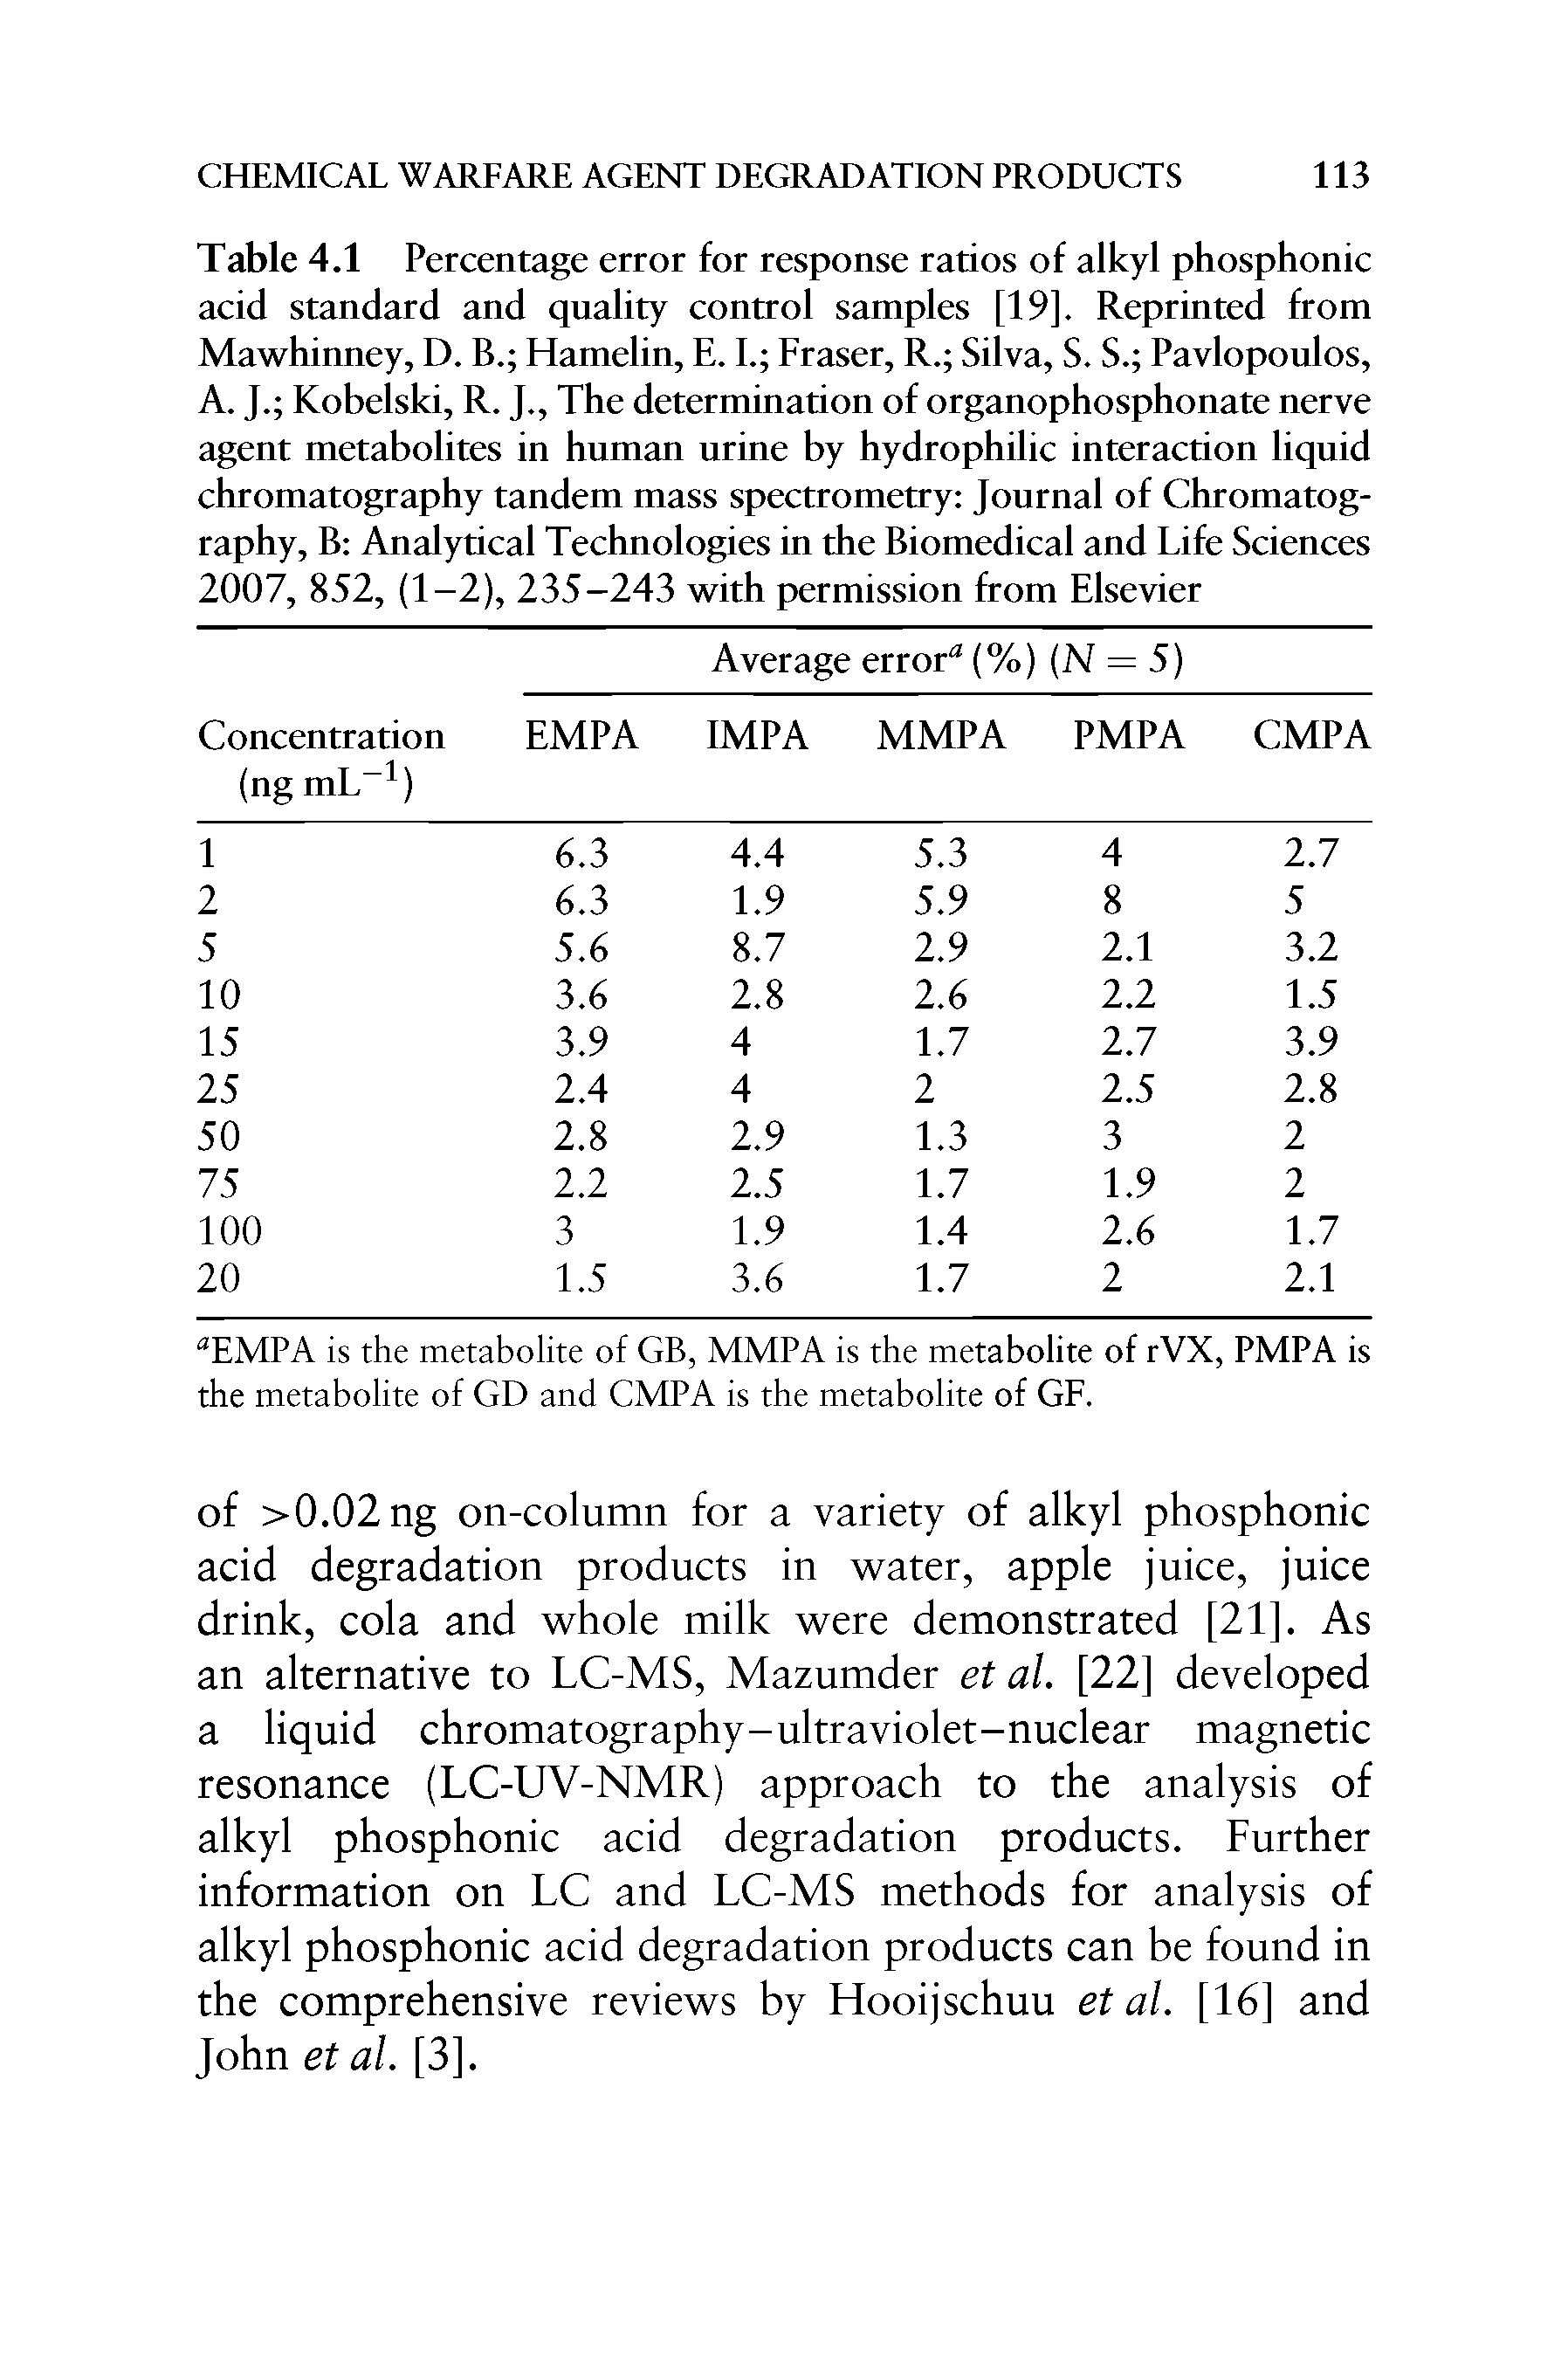 Table 4.1 Percentage error for response ratios of alkyl phosphonic acid standard and qnality control samples [19]. Reprinted from Mawhinney, D. B. Hamelin, E. 1. Fraser, R. Silva, S. S. Pavlopoulos, A. J. Kobelski, R. J., The determination of organophosphonate nerve agent metabolites in hnman urine by hydrophilic interaction liquid chromatography tandem mass spectrometry Journal of Chromatography, B Analytical Technologies in the Biomedical and Life Sciences 2007, 852, (1-2), 235-243 with permission from Elsevier...